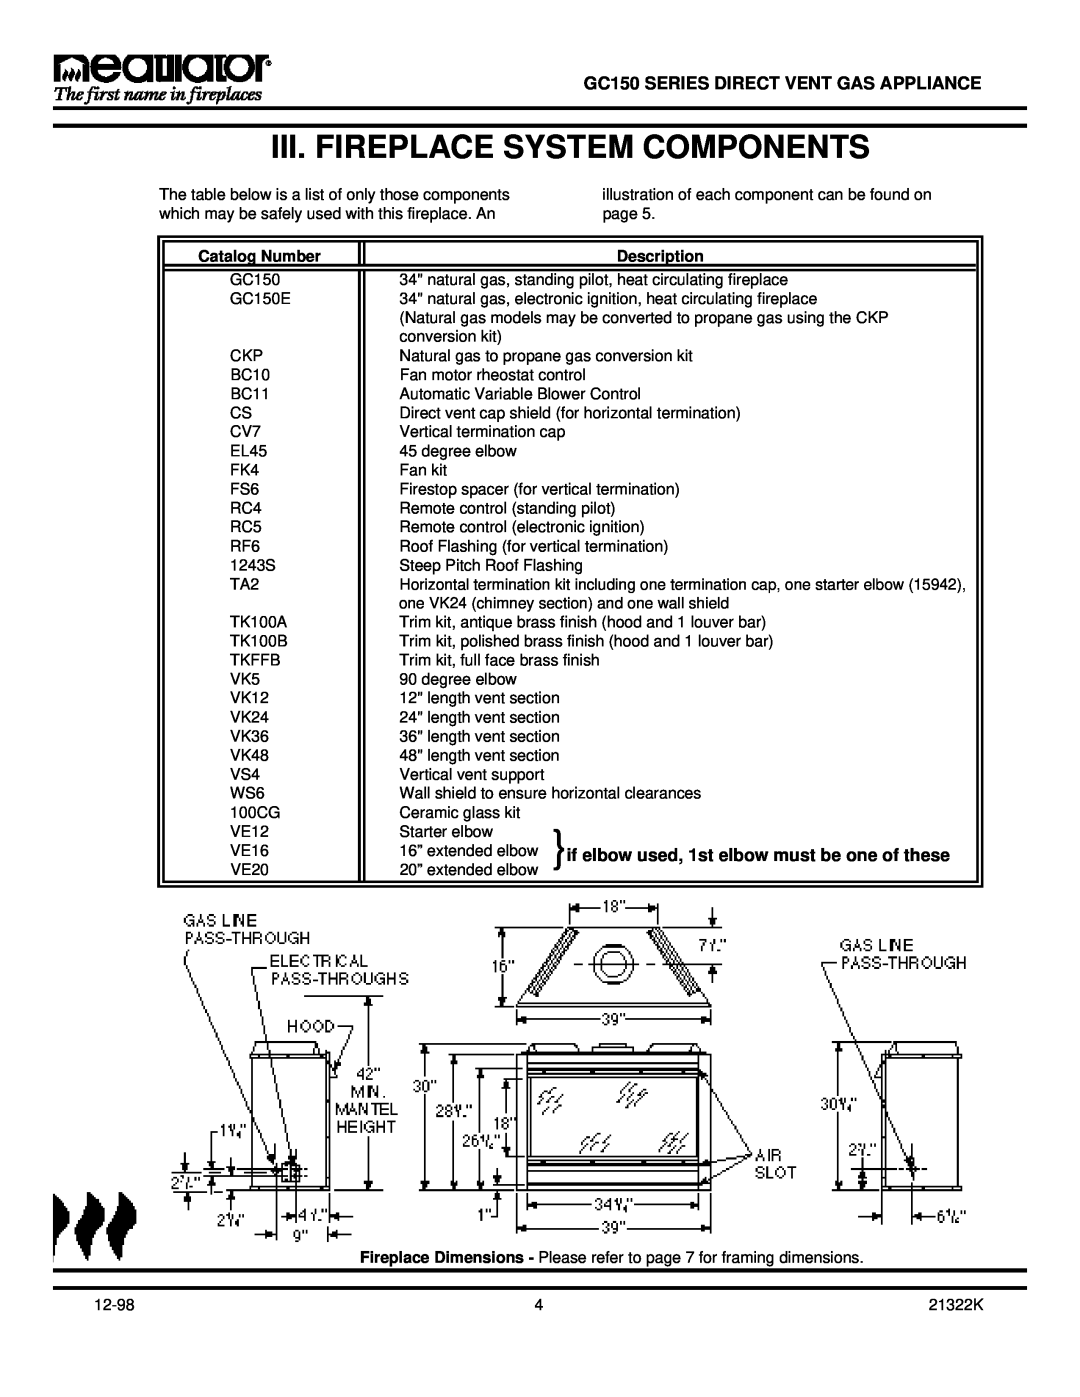 Heatiator Iii. Fireplace System Components, GC150 SERIES DIRECT VENT GAS APPLIANCE, Catalog Number, Description 